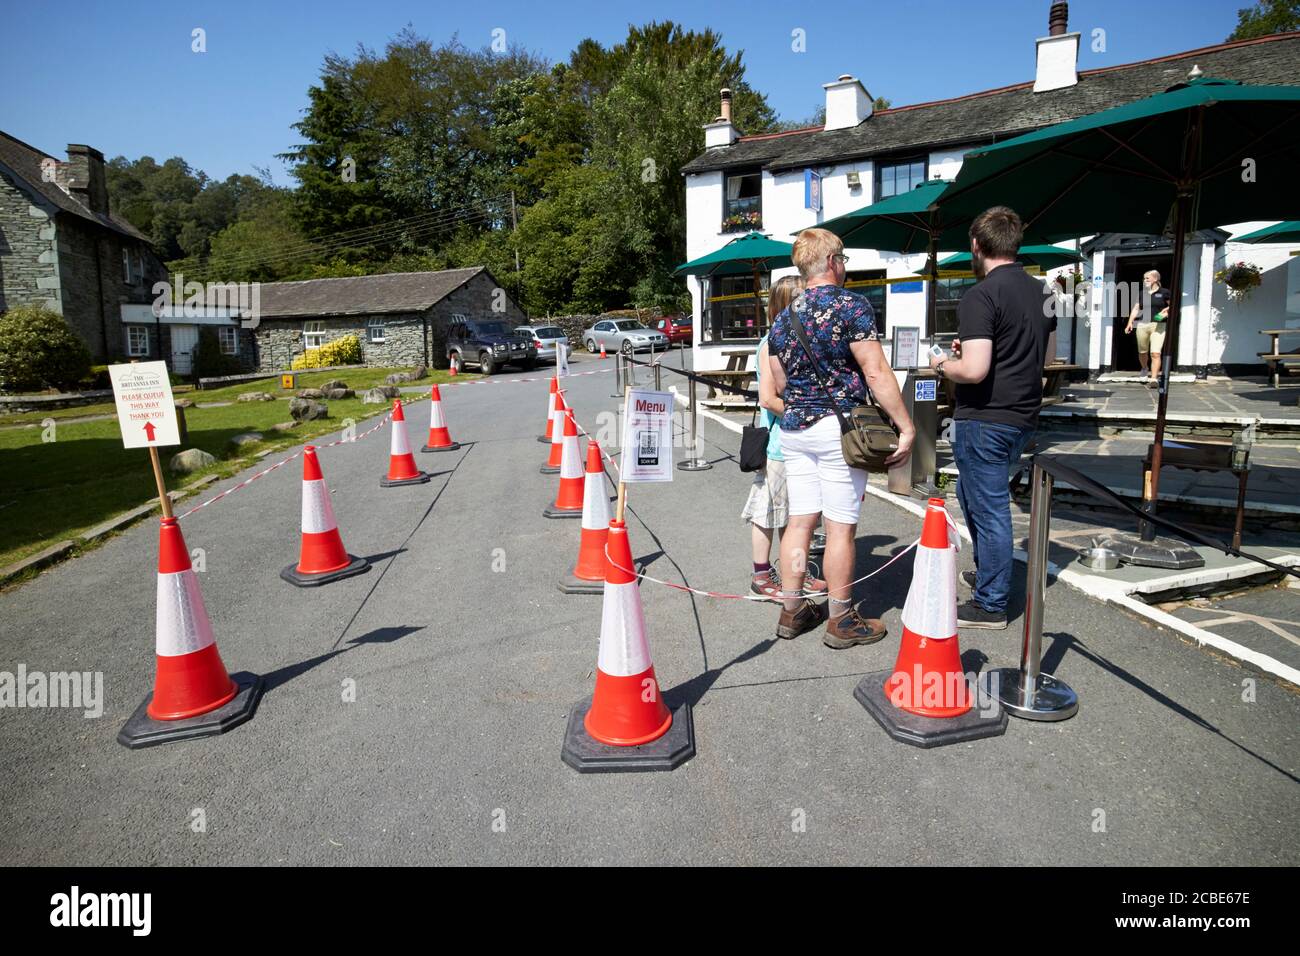 measures put in place for social distancing outside a the britannia inn pub during the covid-19 coronavirus outbreak in the lake district cumbria engl Stock Photo